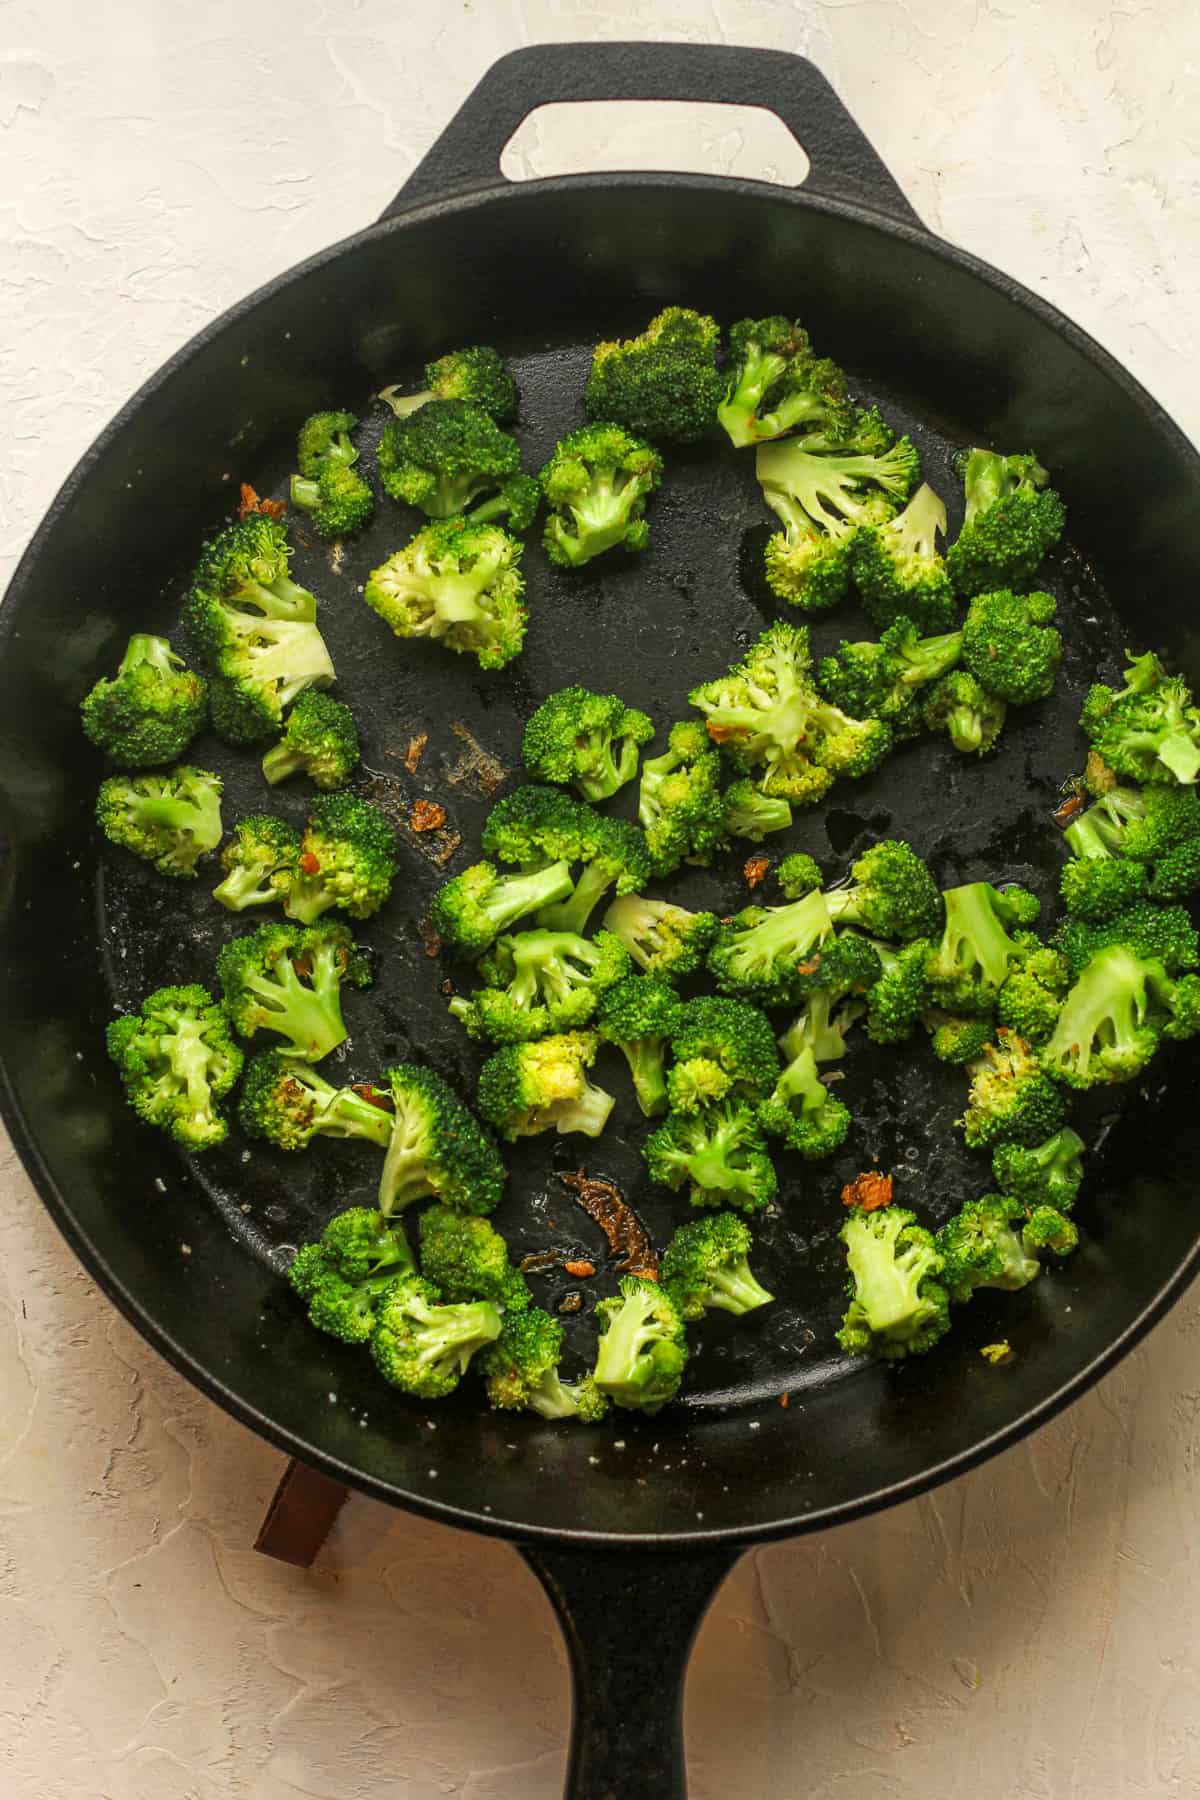 A skillet of cooked broccoli.